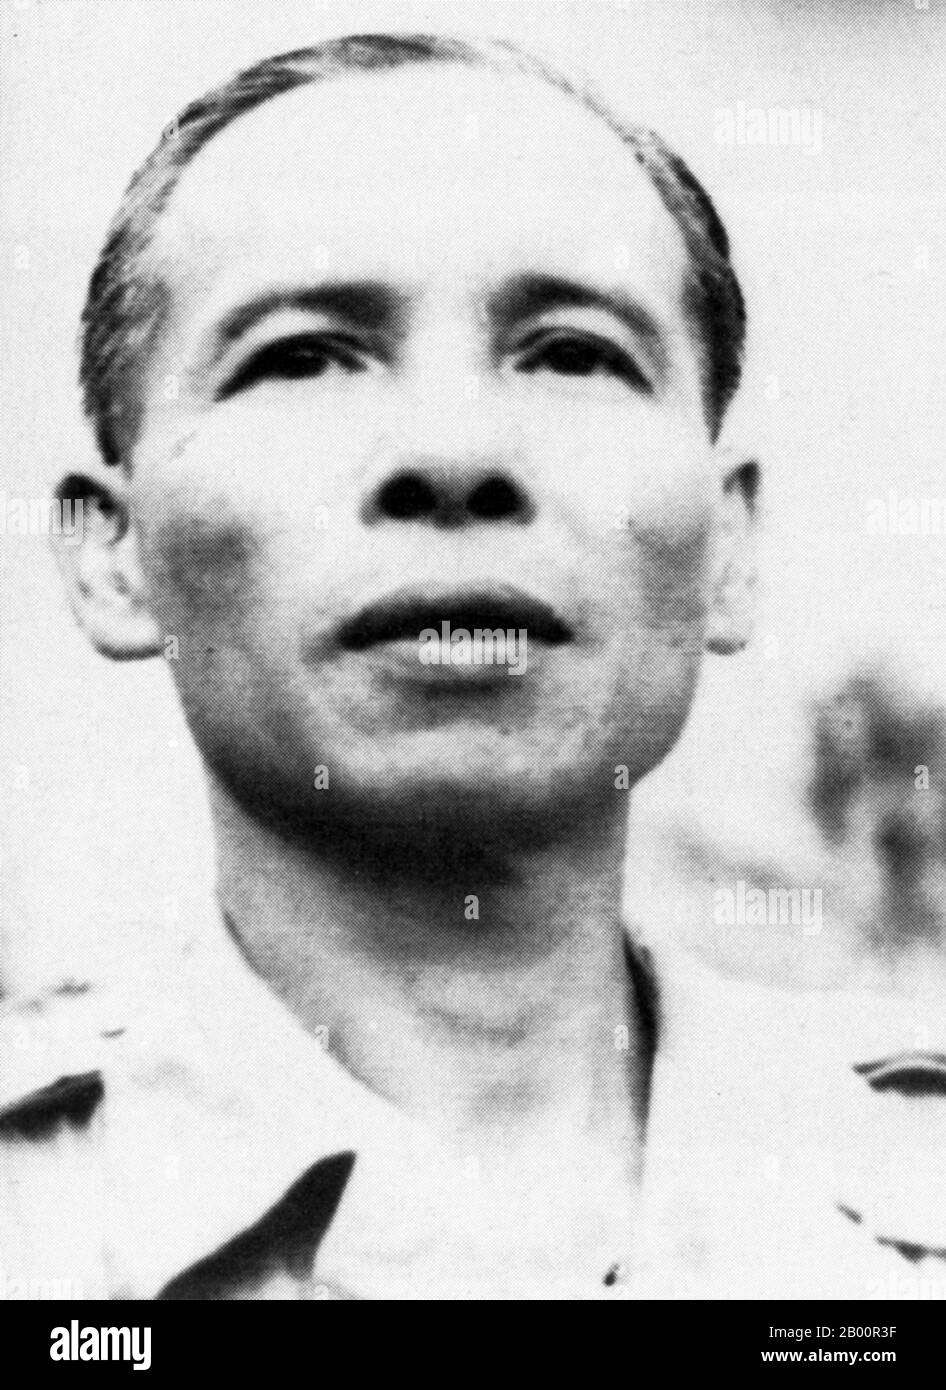 Cambodia: Tou Samouth (c.1915-1962), also known as Achar Sok, was a Cambodian Communist politician and a founder member of the Cambodian Communist Party.  Tou Samouth (c.1915-1962), also known as Achar Sok, was a Cambodian Communist politician. One of the founder members of the Party in Cambodia, and head of its more moderate faction, he is mainly remembered for mentoring Saloth Sar, the man who would later become Pol Pot, leader of the Khmer Rouge. Samouth disappeared in disputed circumstances in July 1962. Stock Photo